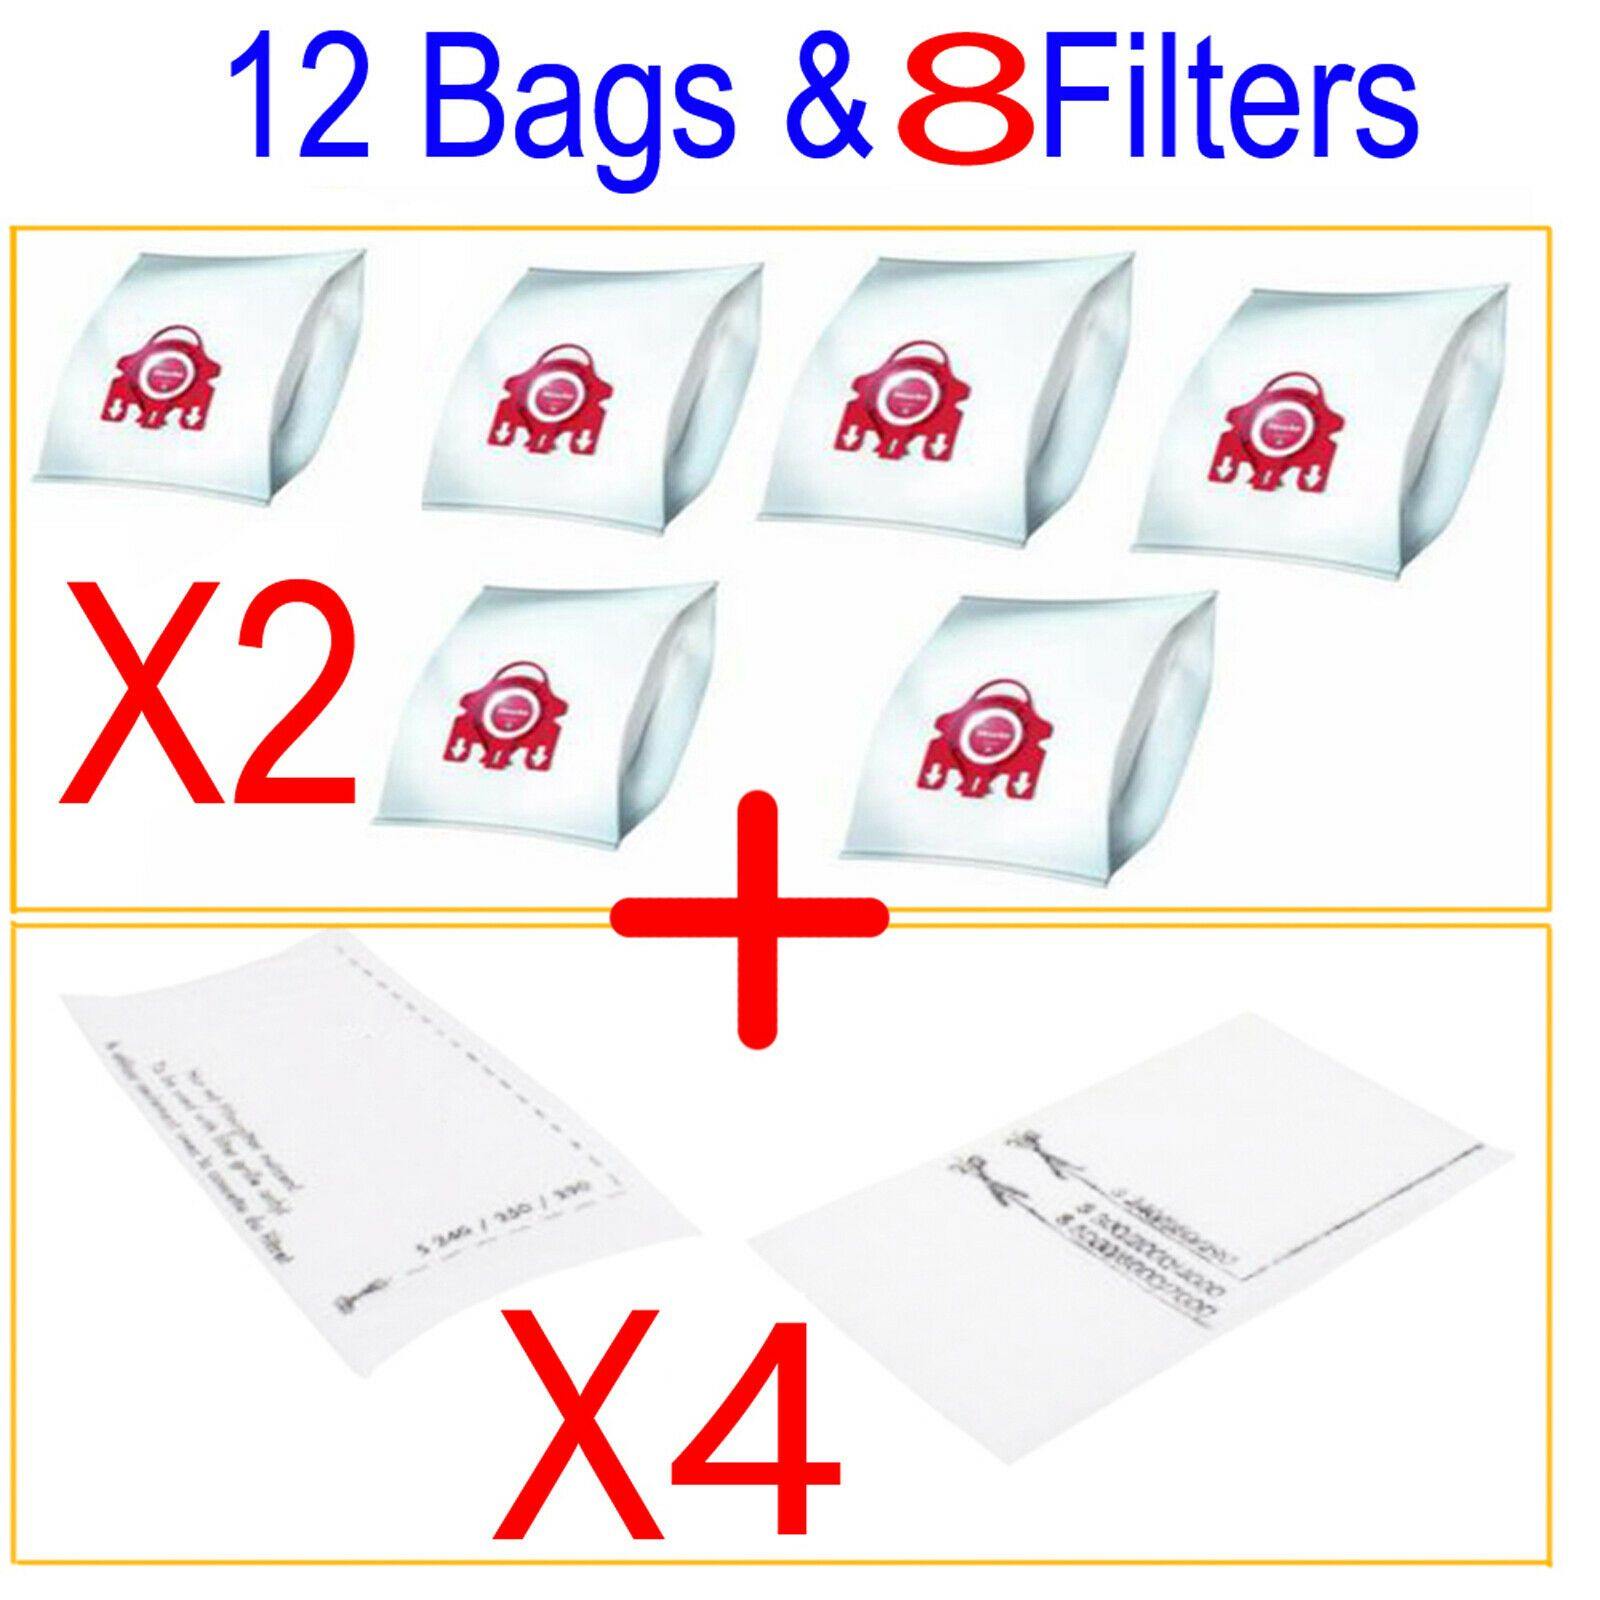 12 Synthetic Bags & 8 Filters For Miele FJM S251i-1 S255i S256 S291 S291-2 Sparesbarn